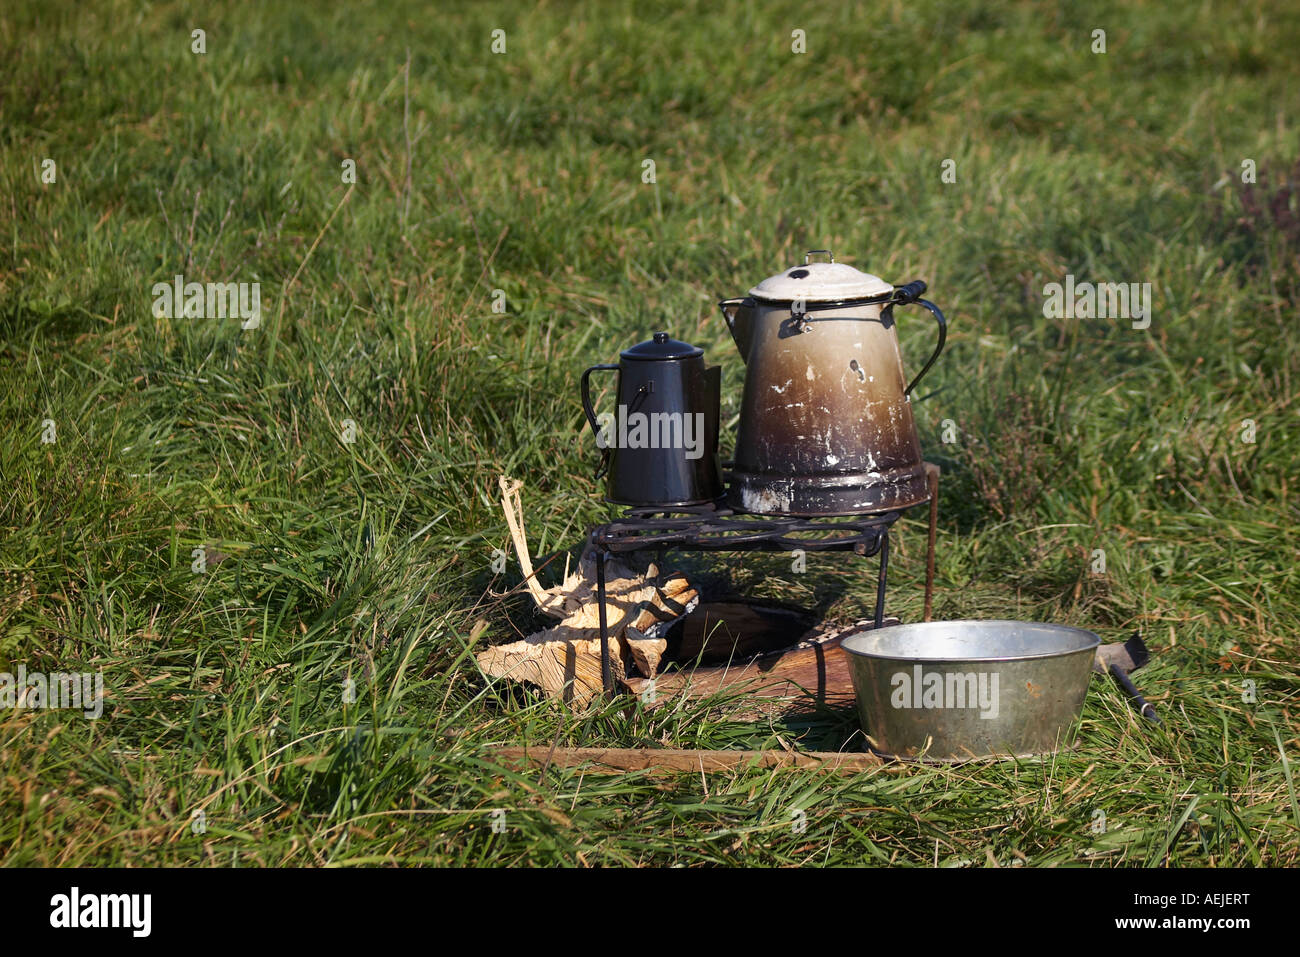 Preparation for a campfire Stock Photo